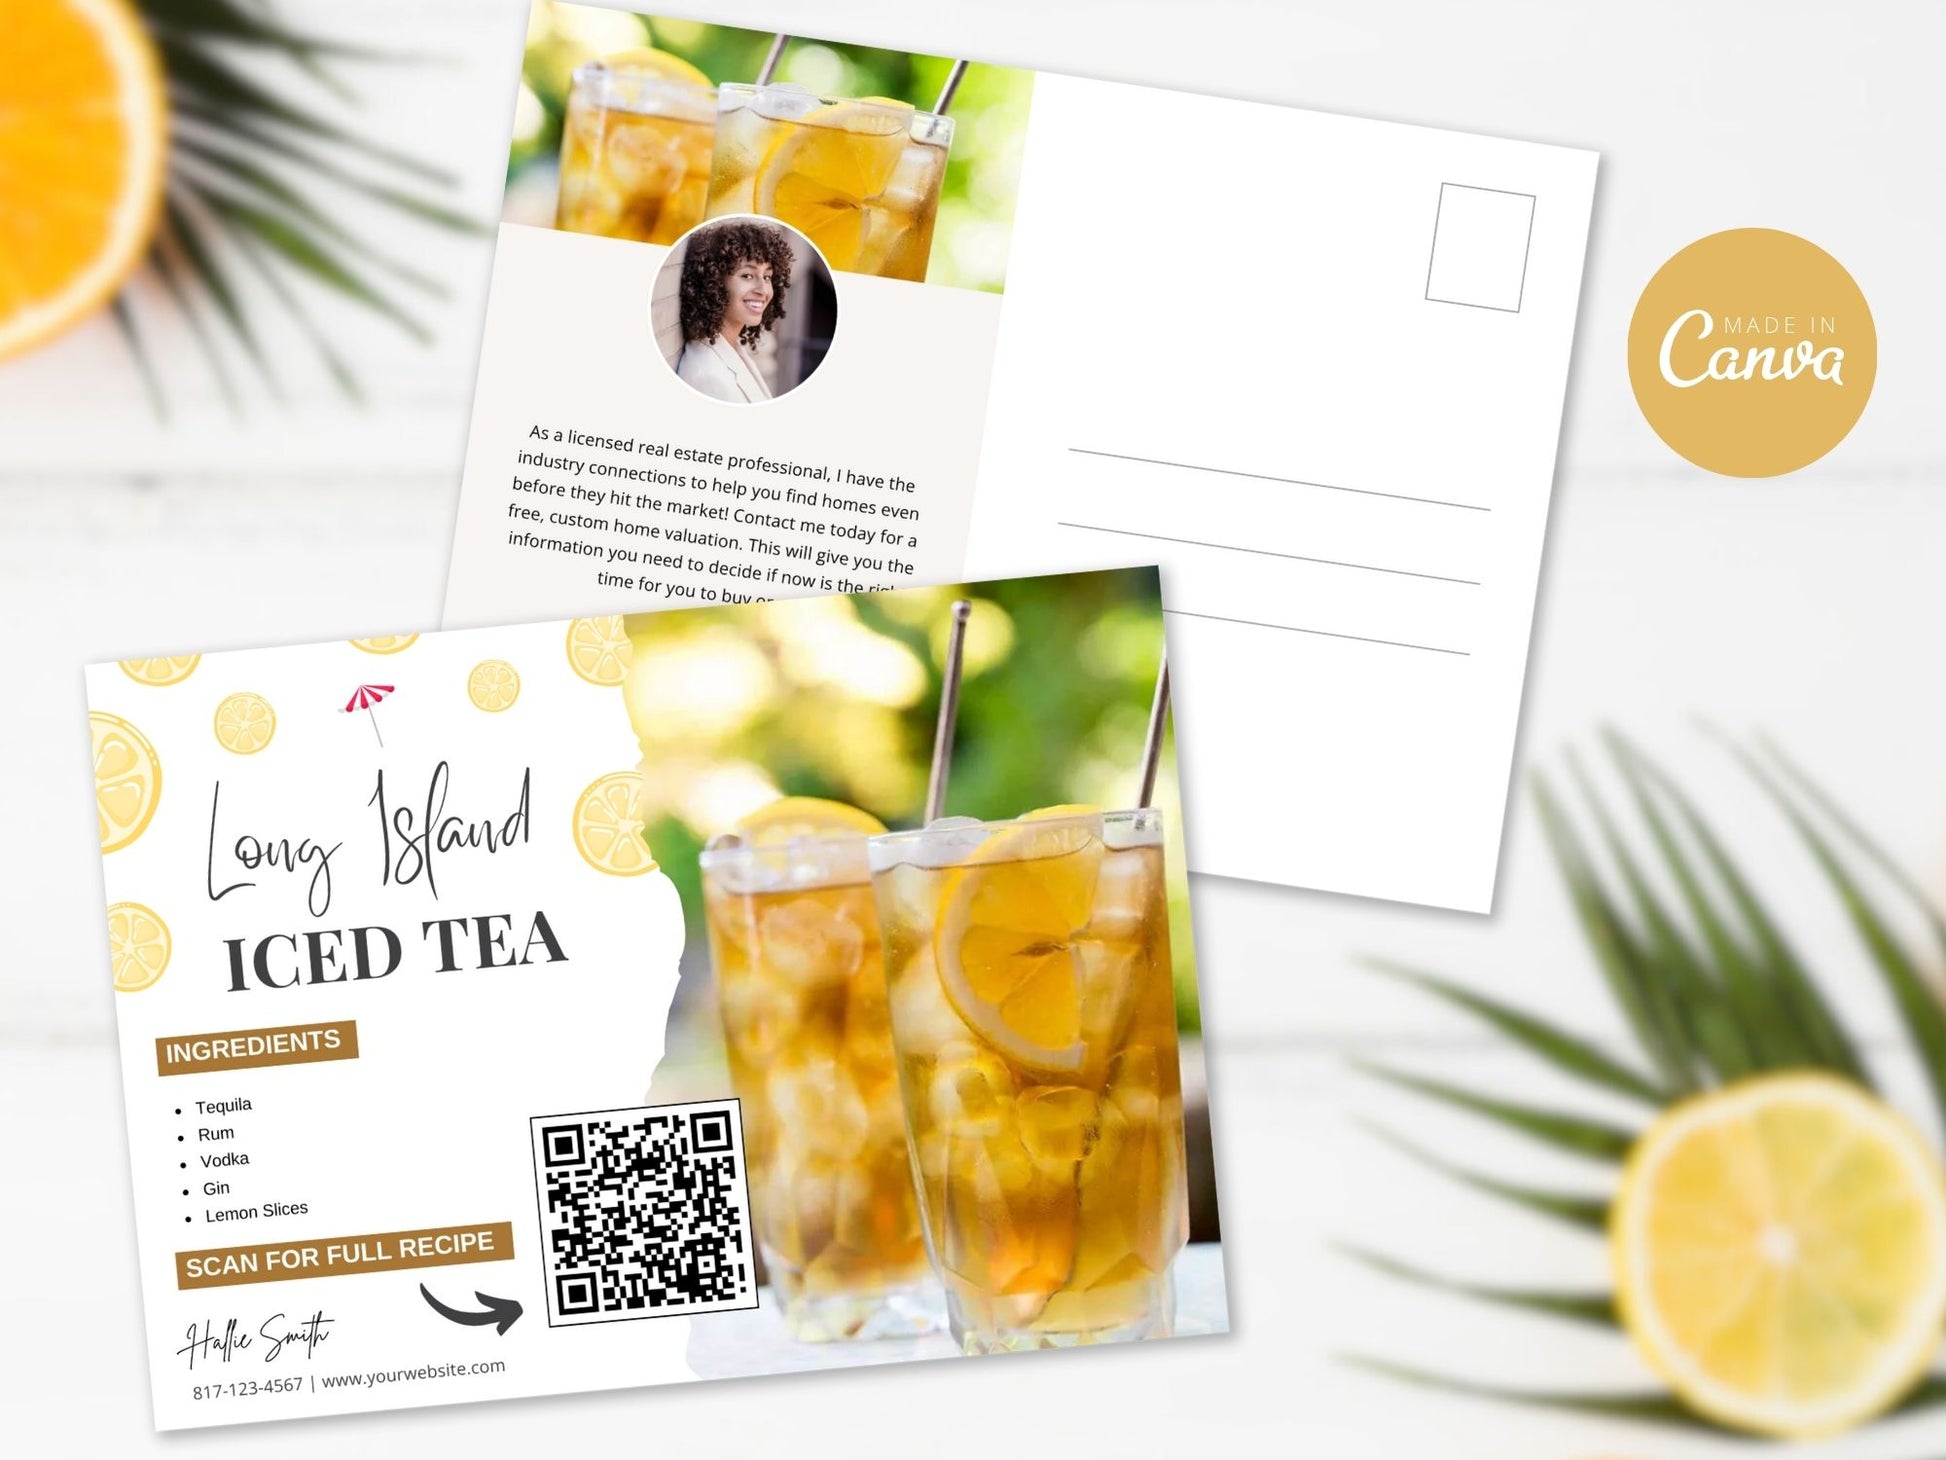 Cocktail Recipe Postcard Bundle - Elevate client connections with Pina Colada, Long Island Iced Tea, and Vodka Strawberry Lemonade recipes. Add a refreshing twist to real estate marketing with delightful cocktail recipe postcards.